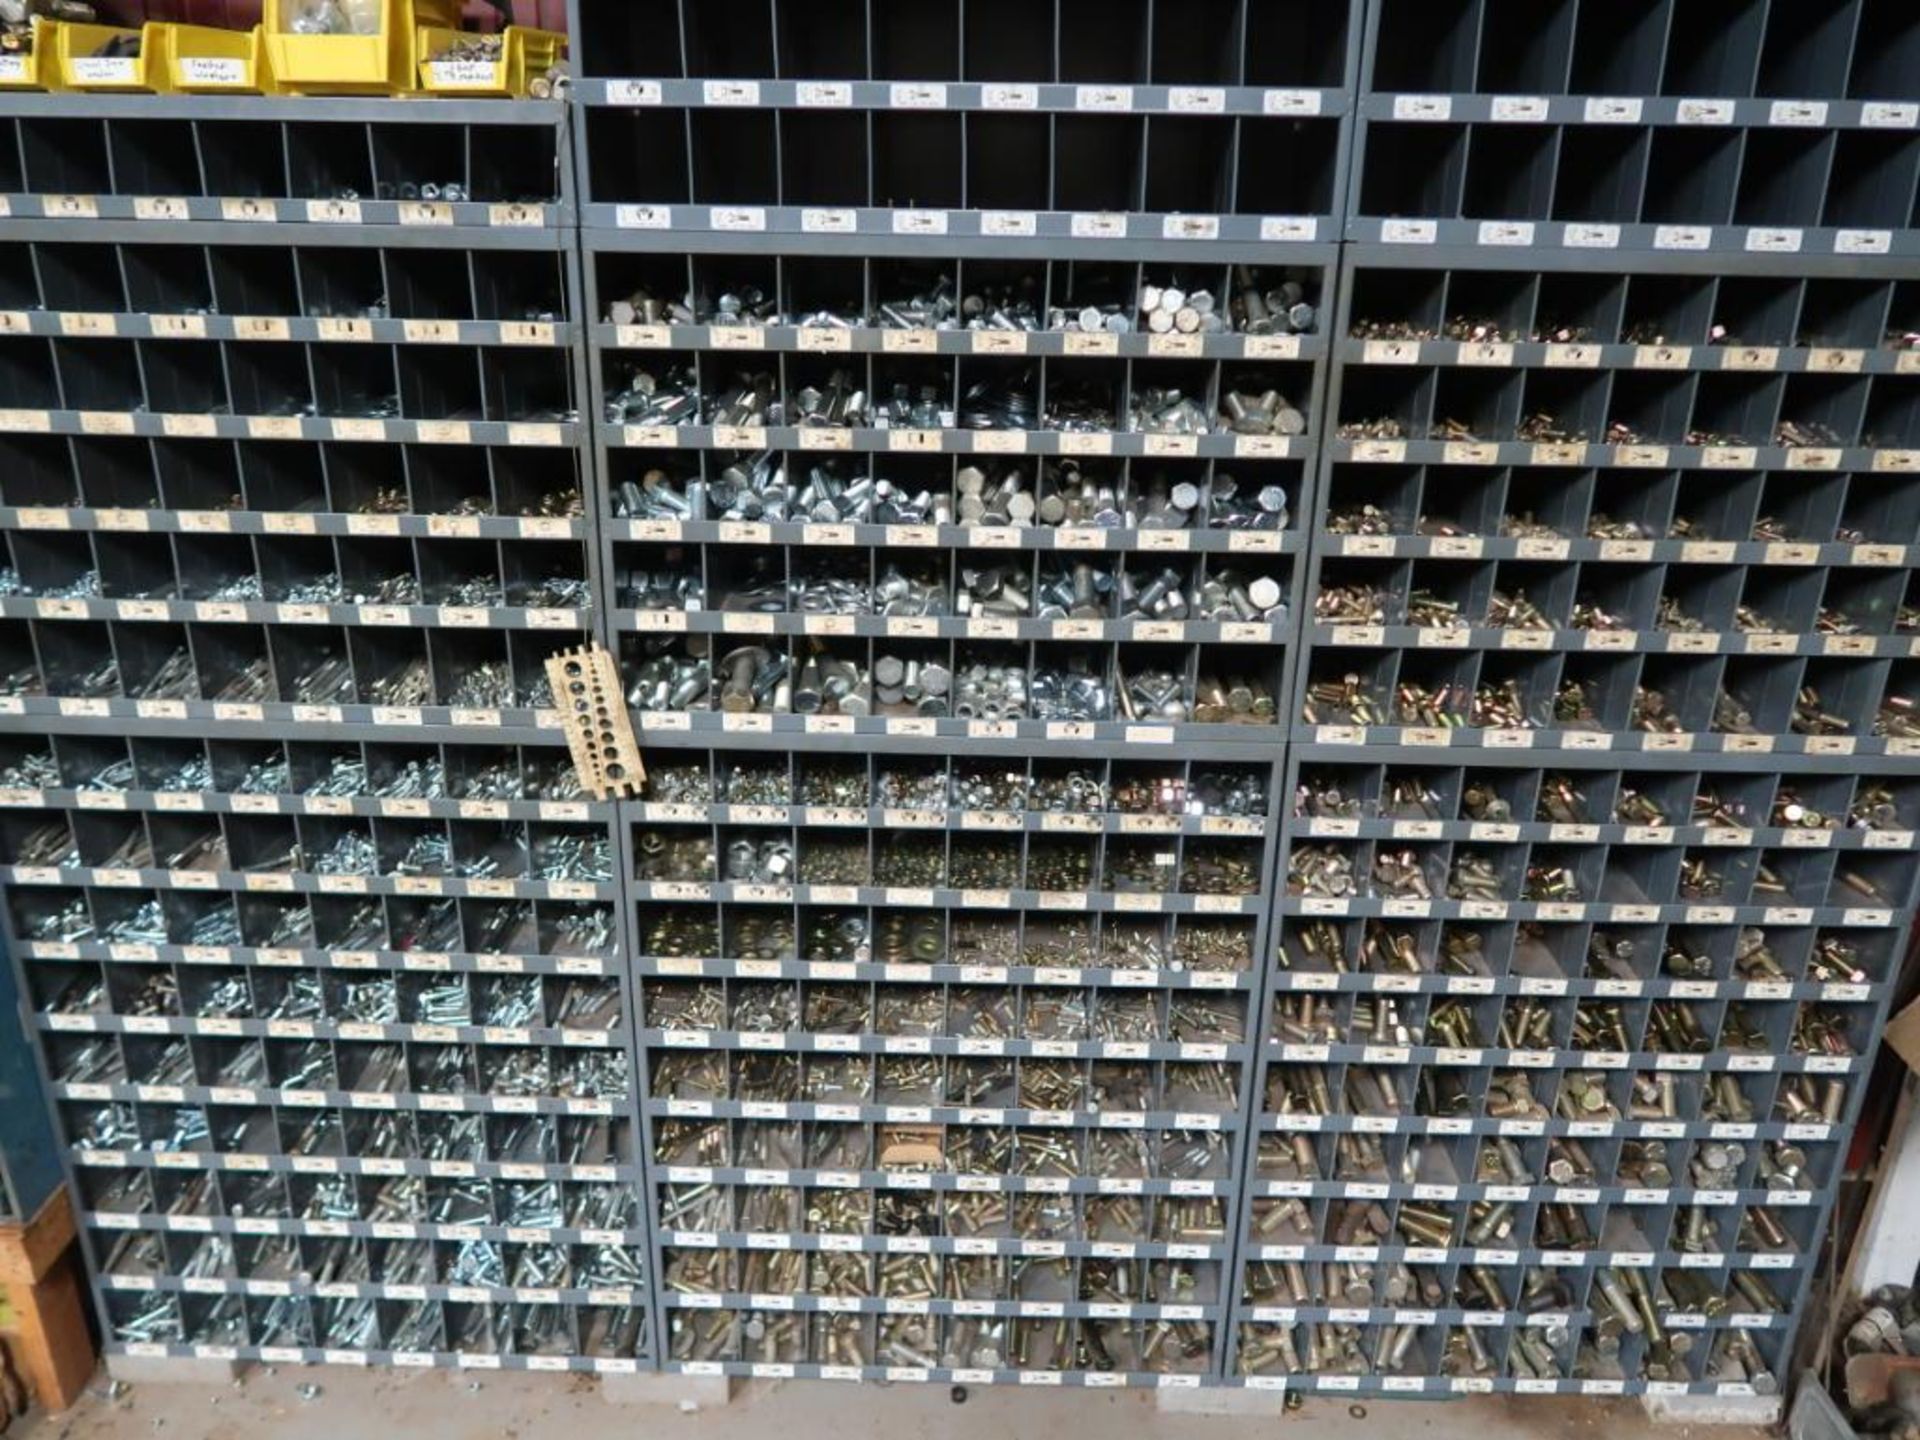 LOT: Large Quantity of Fasteners with Cubby Hole Shelving & Drawers - Image 7 of 7